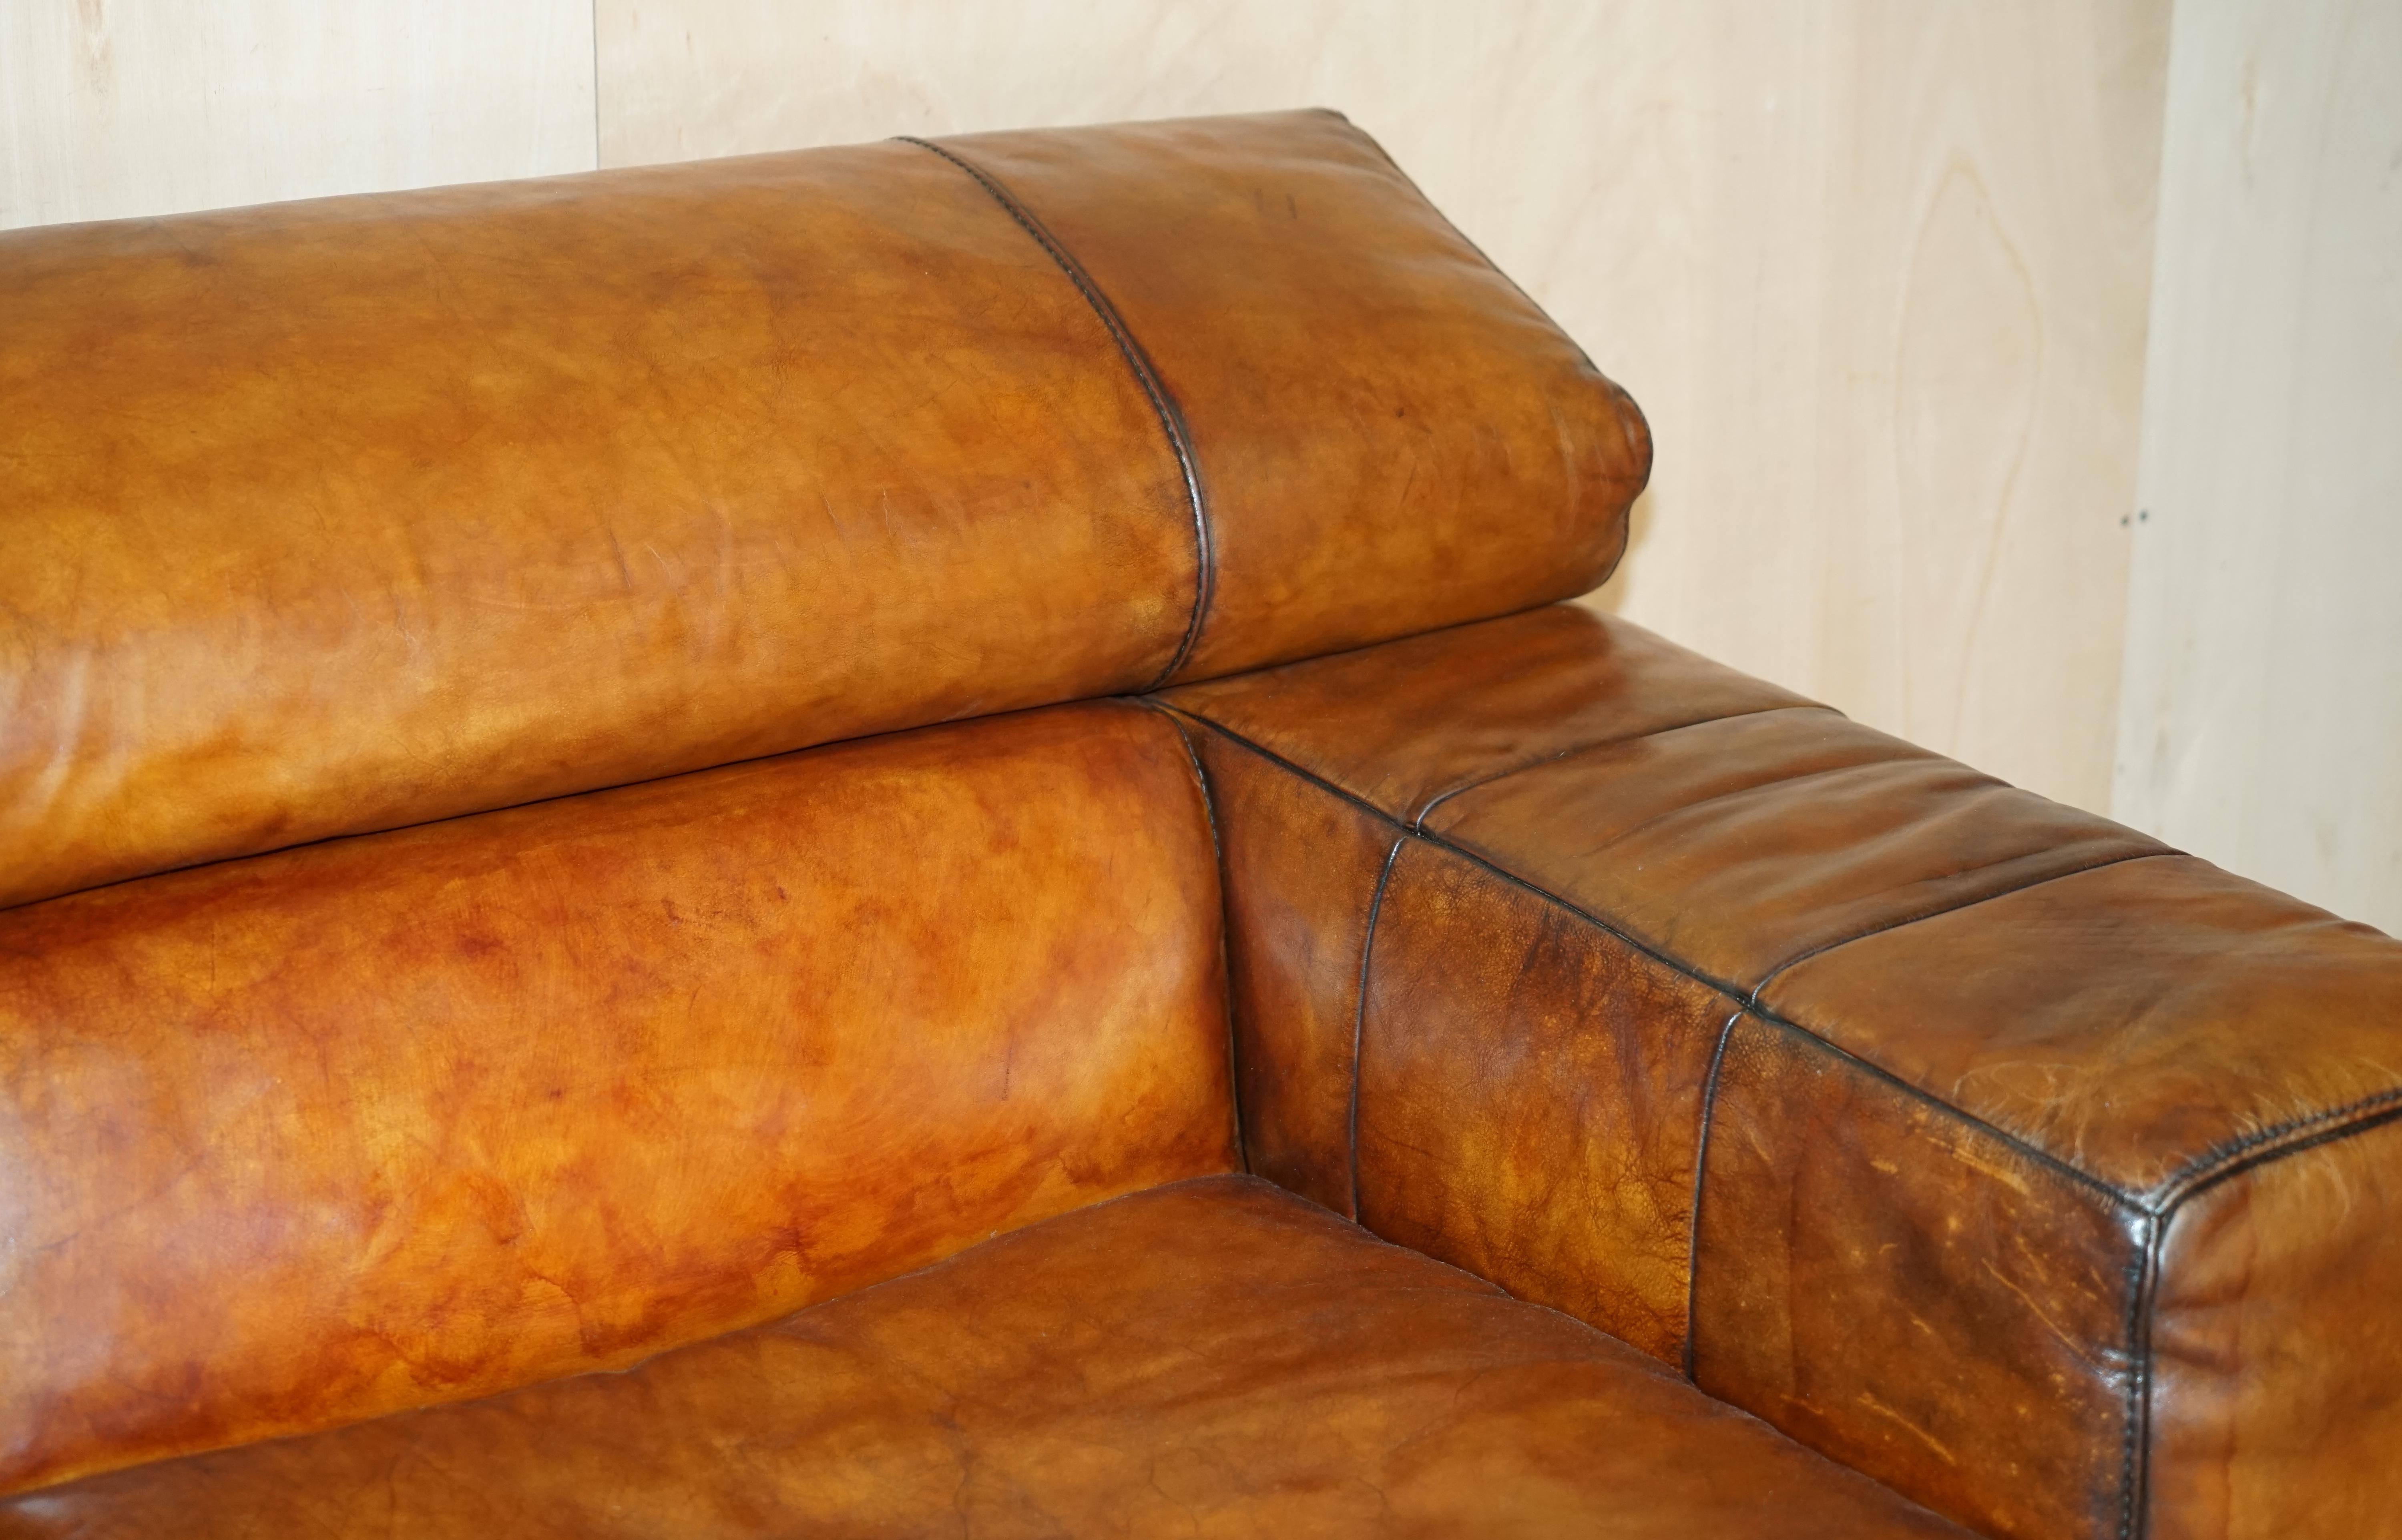 Natuzzi Roma Hand Dyed Cigar Brown Leather Sofa Raising Headrest Part of a Suite For Sale 3